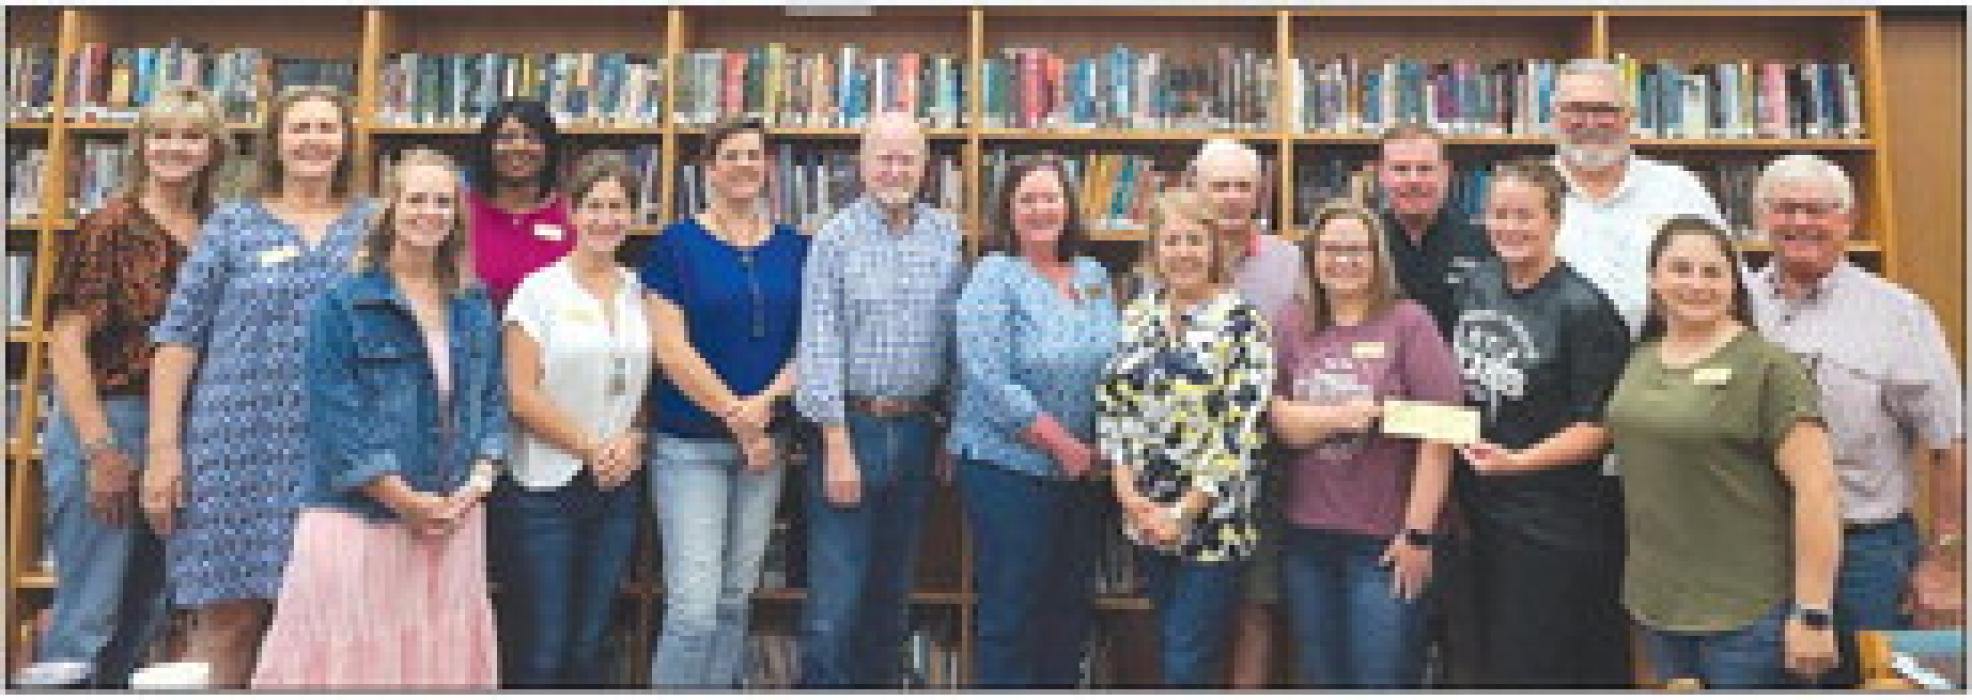 The Round Top-Carmine Education Foundation, in addition to providing over $18,000 in innovation teacher grants and $81,000 in whiteboards and Chromebook technology, presented to the RT-Carmine ISD campus principals $30,000 to support Arts and Music programs. Pictured are Foundation Board members, Foundation Executive Director Linda Patterson, and Campus Principals Amy Weinert, and RaChelle Kuecker.